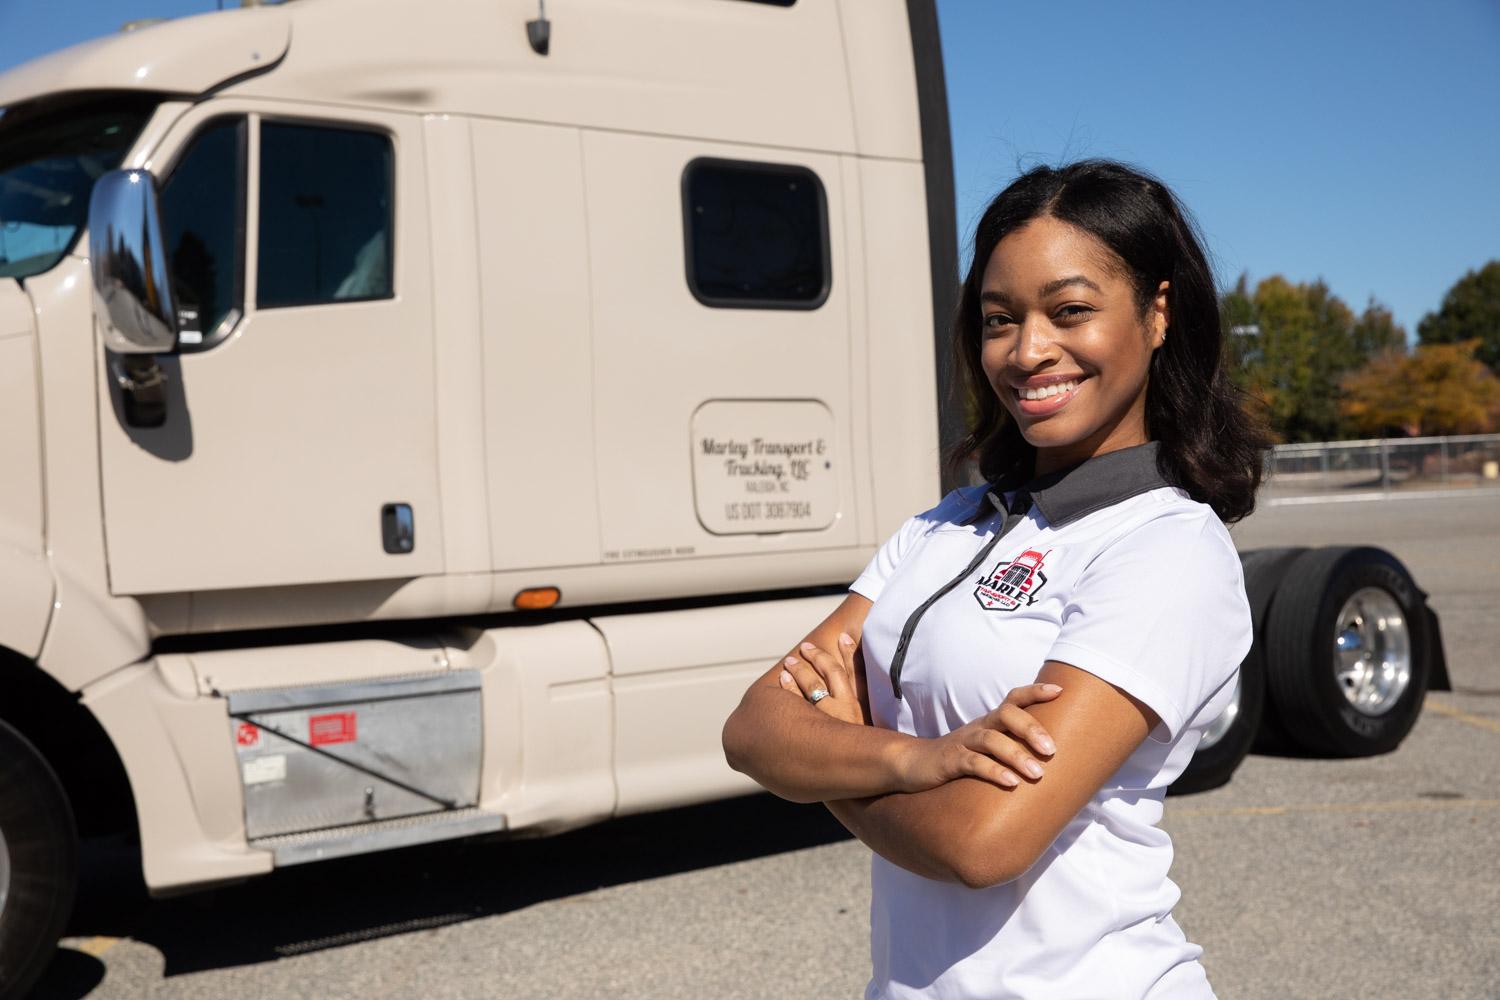 A loan through the Wisdom Fund helped Shavon Marley, owner and founder of Marley Transport & Trucking in Raleigh, North Carolina, grow her business.